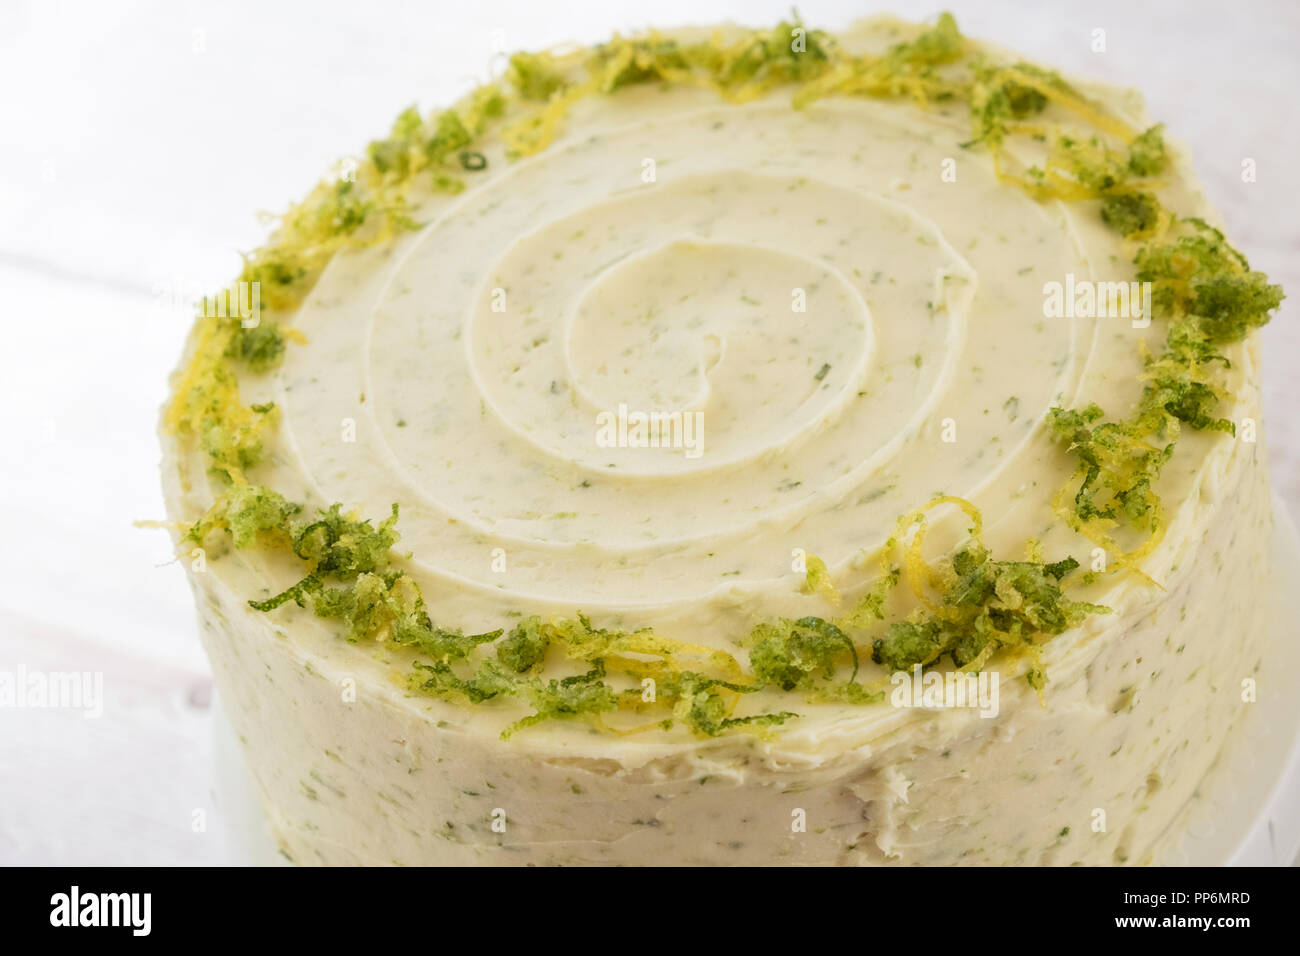 High angle view of a baked gin and tonic flavoured cake with icing and lime zest decoration Stock Photo